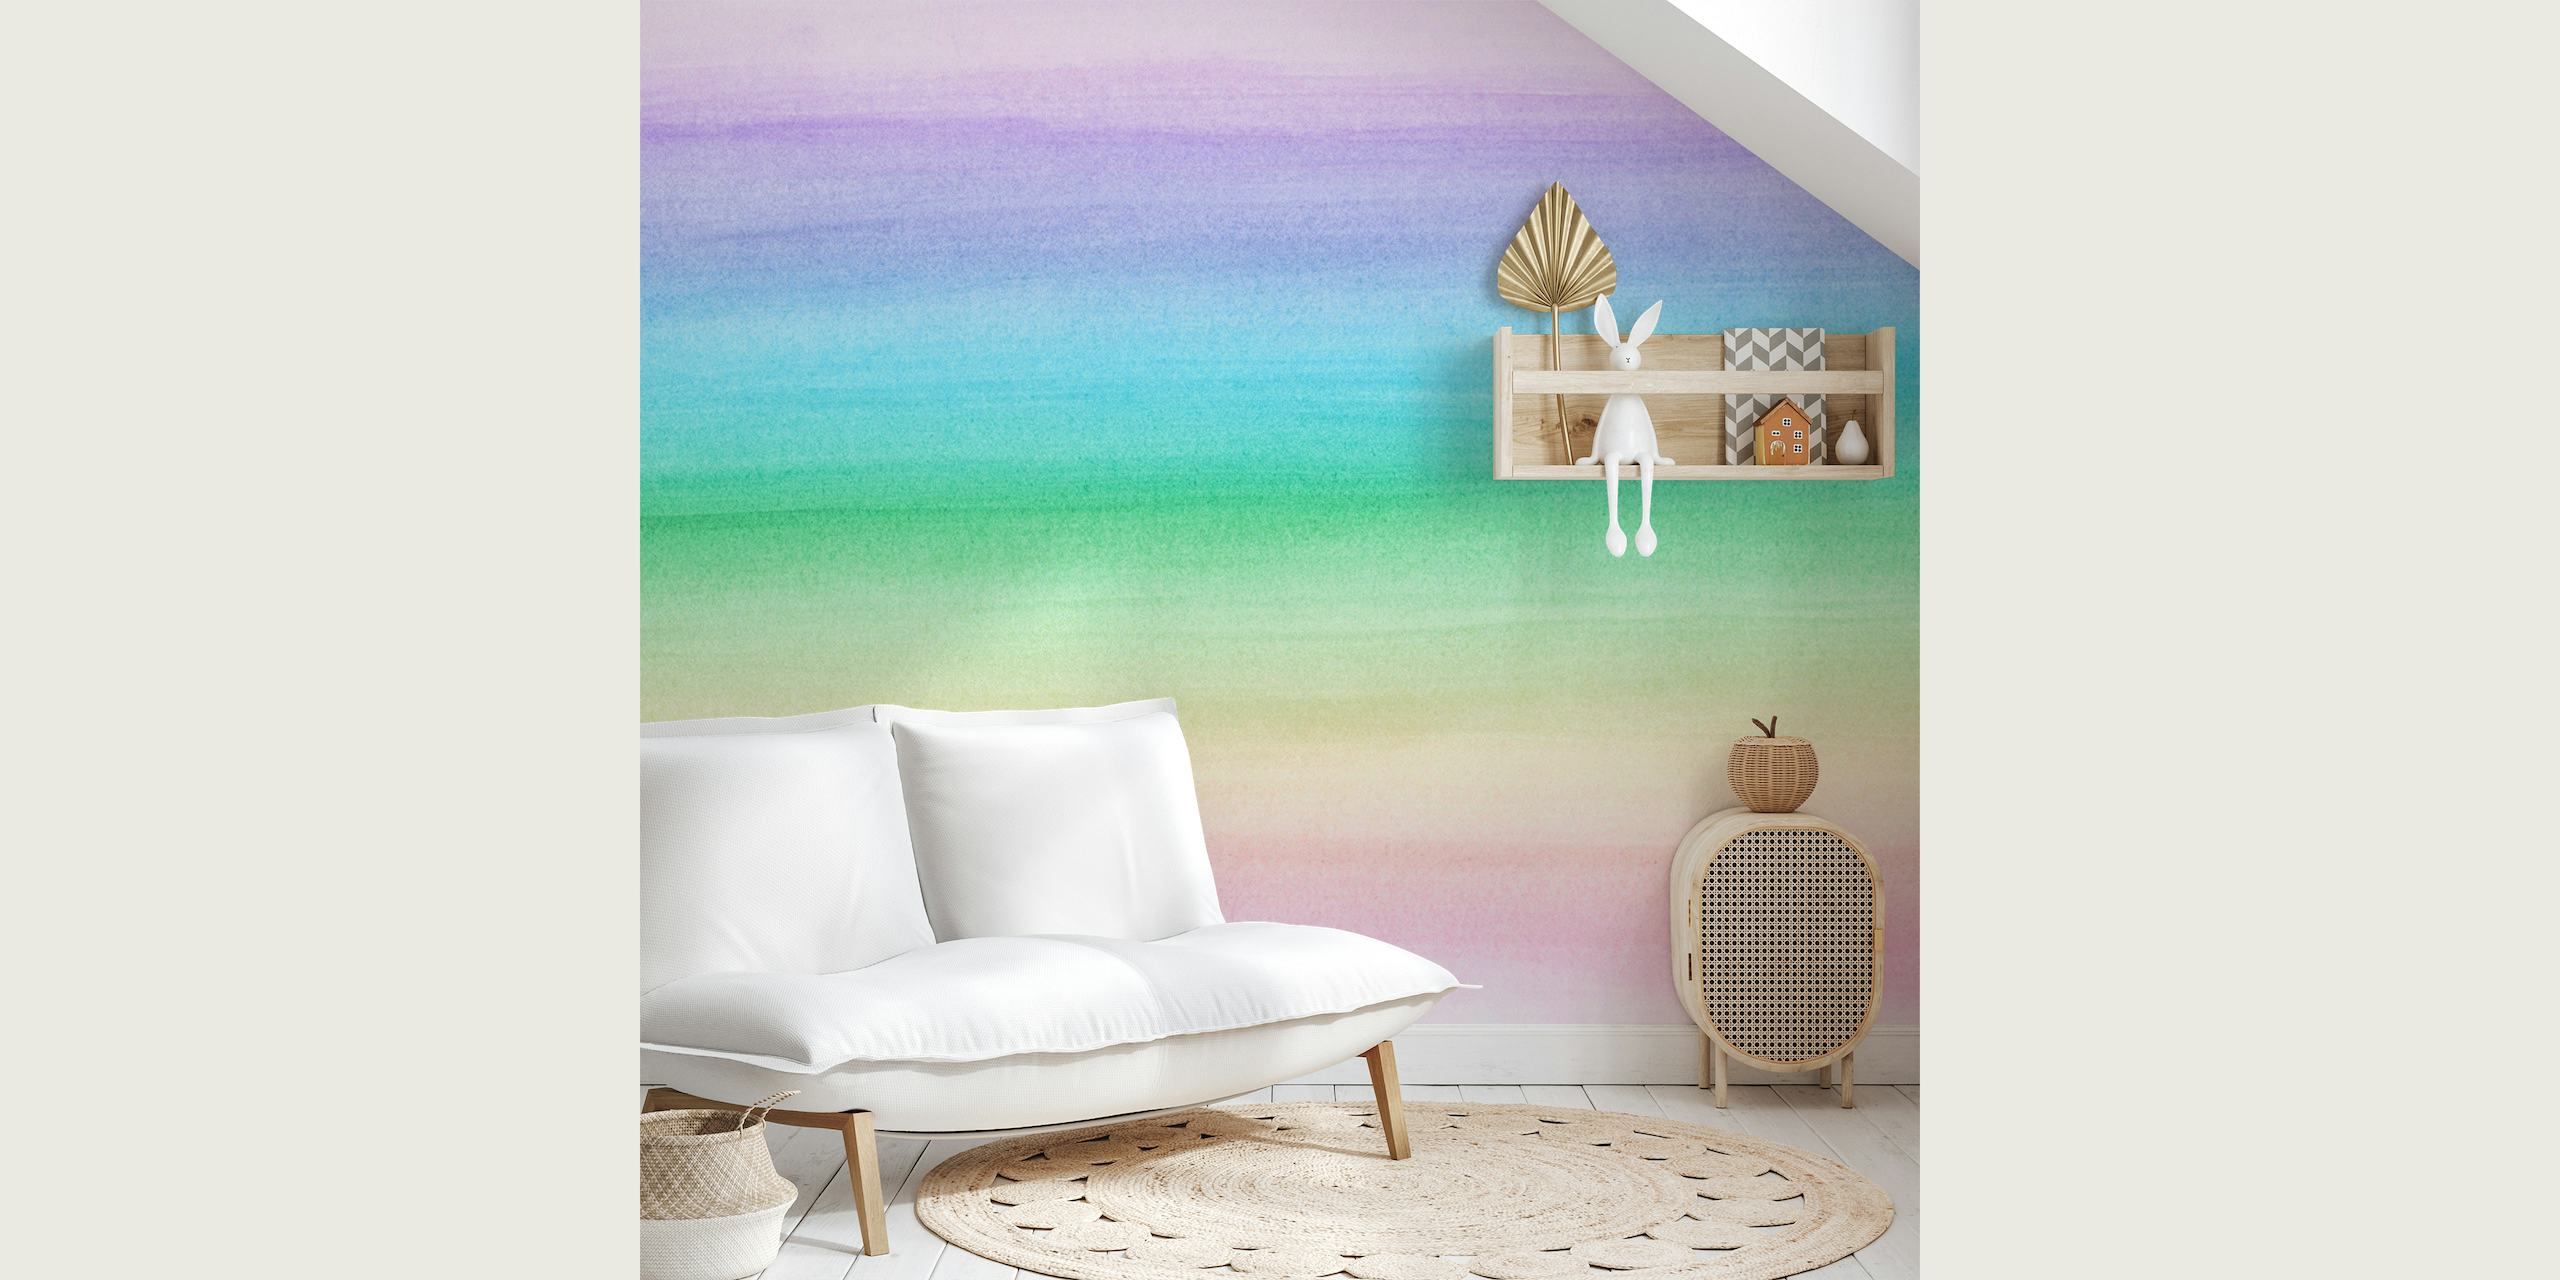 Watercolor pastel rainbow wall mural for a magical room ambiance